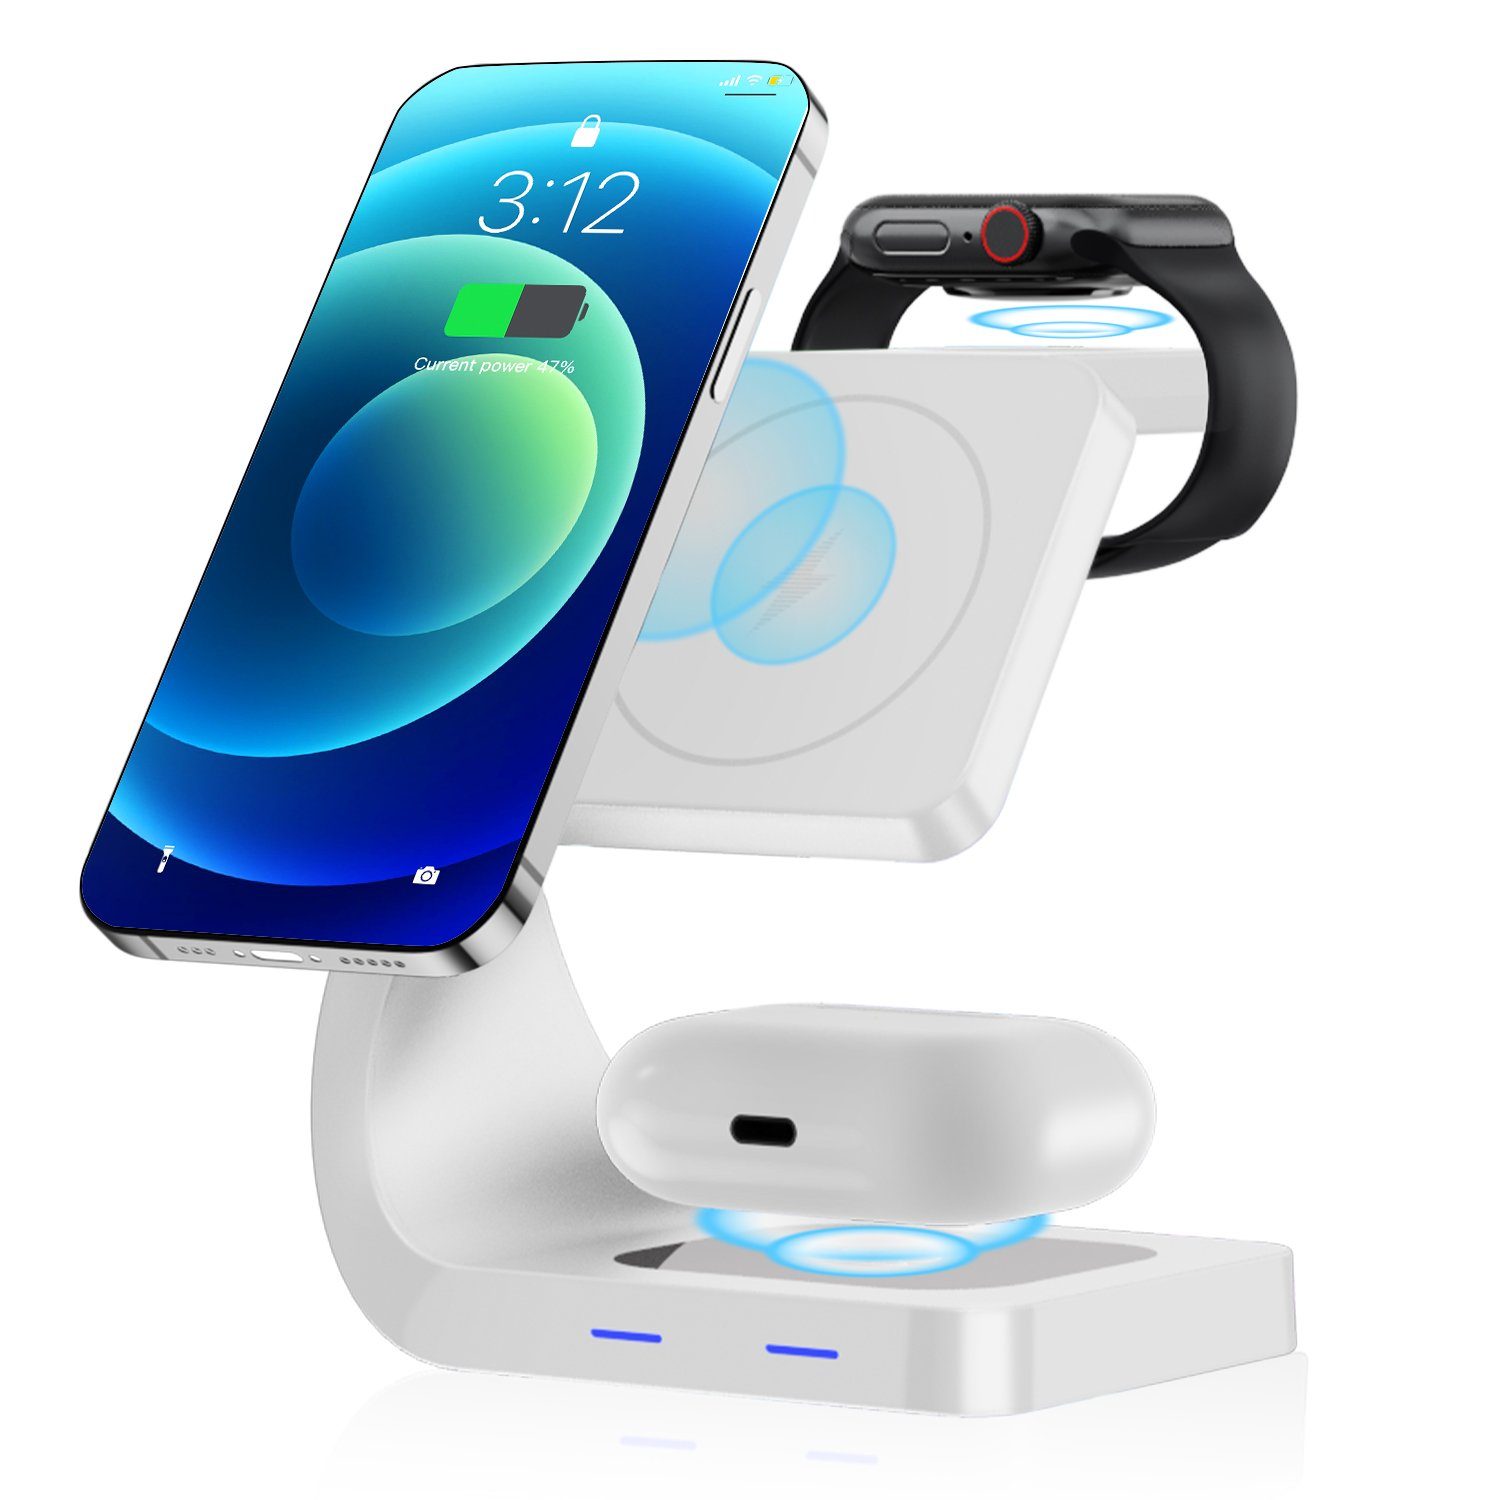 EUARY Handy-Dockingstation Ladestation 3 in 1 Induktive Ladegerät Kabellose  Wireless Charger, (Apple Watch Iphone Airpods Handy Charging Station  Induktive Ladegerät), Mag-Safe-Ladeständer mit QC3.0-Adapter für iPhone  14/13/12 Pro